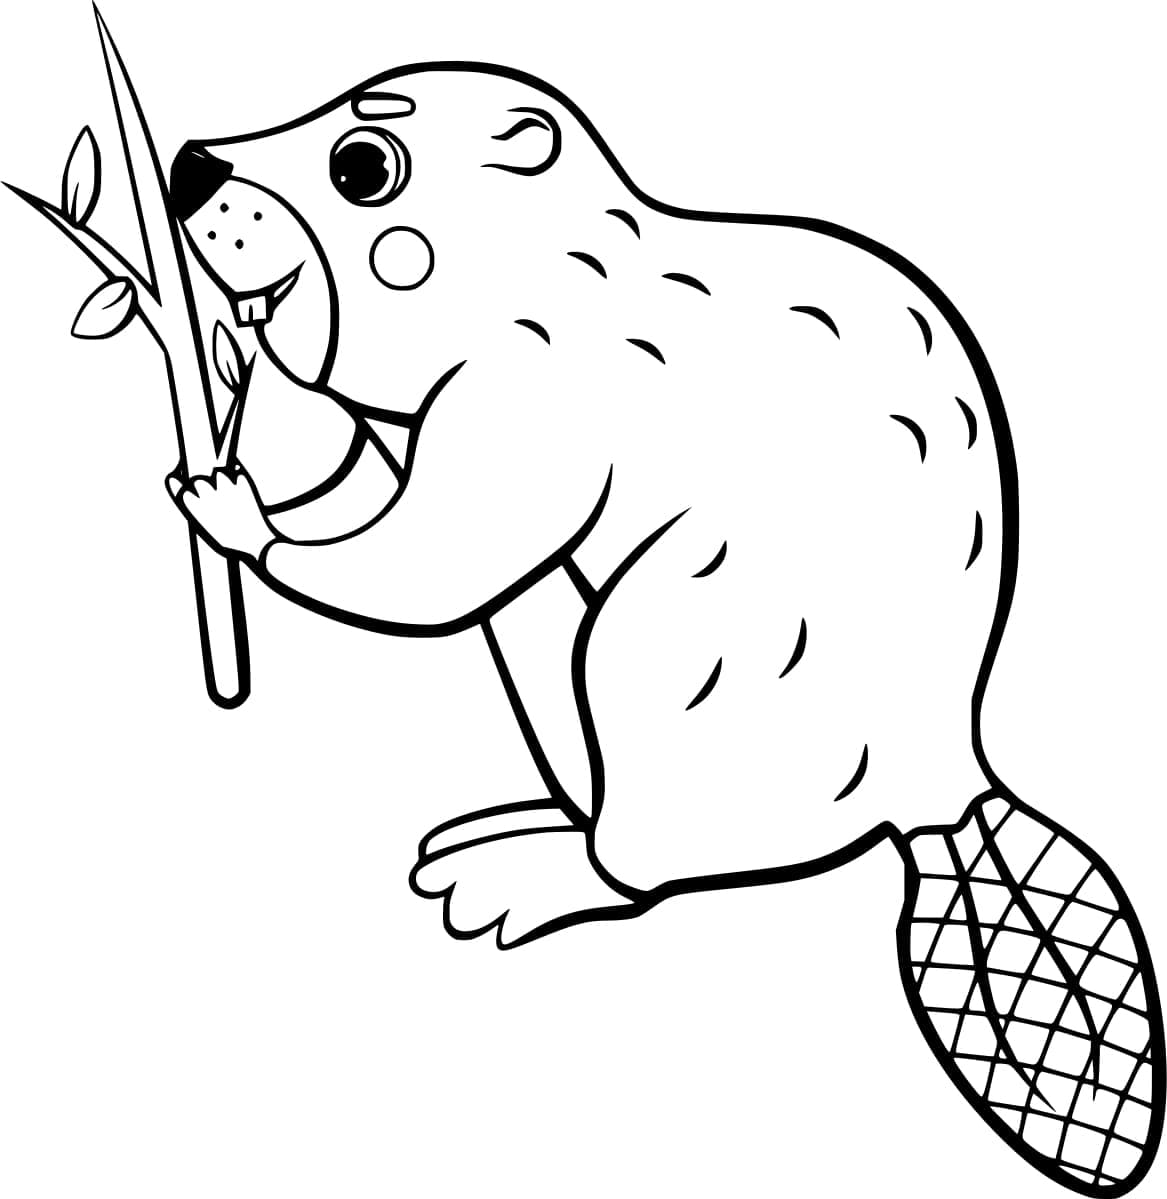 Adorable Castor coloring page